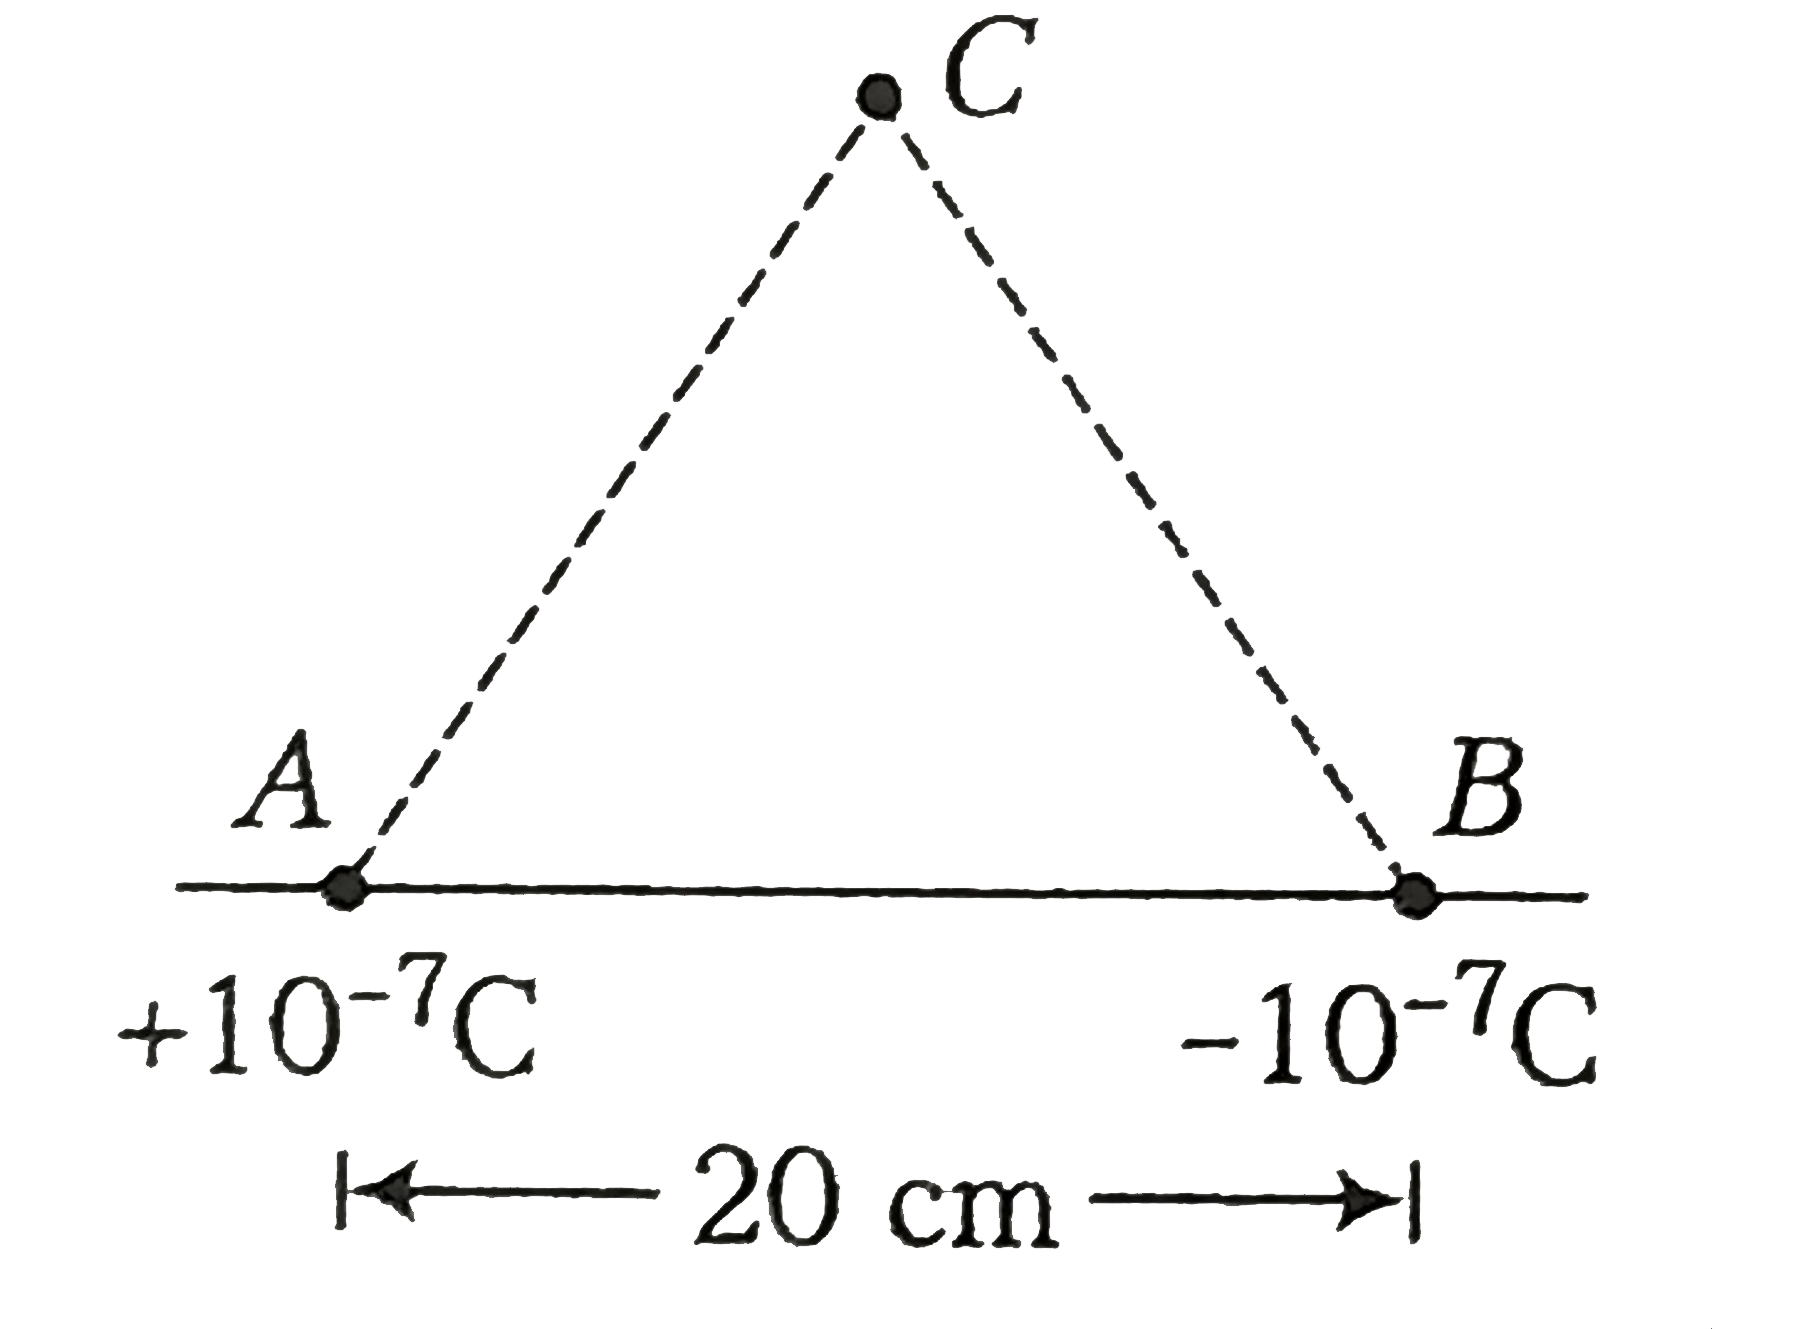 Two point charges +10^(-7) C and -10^(-7)C are placed at A and B 20 cm apart as shown in the figure. Calculate the electric field at C, 20 cm apart from both A and B.